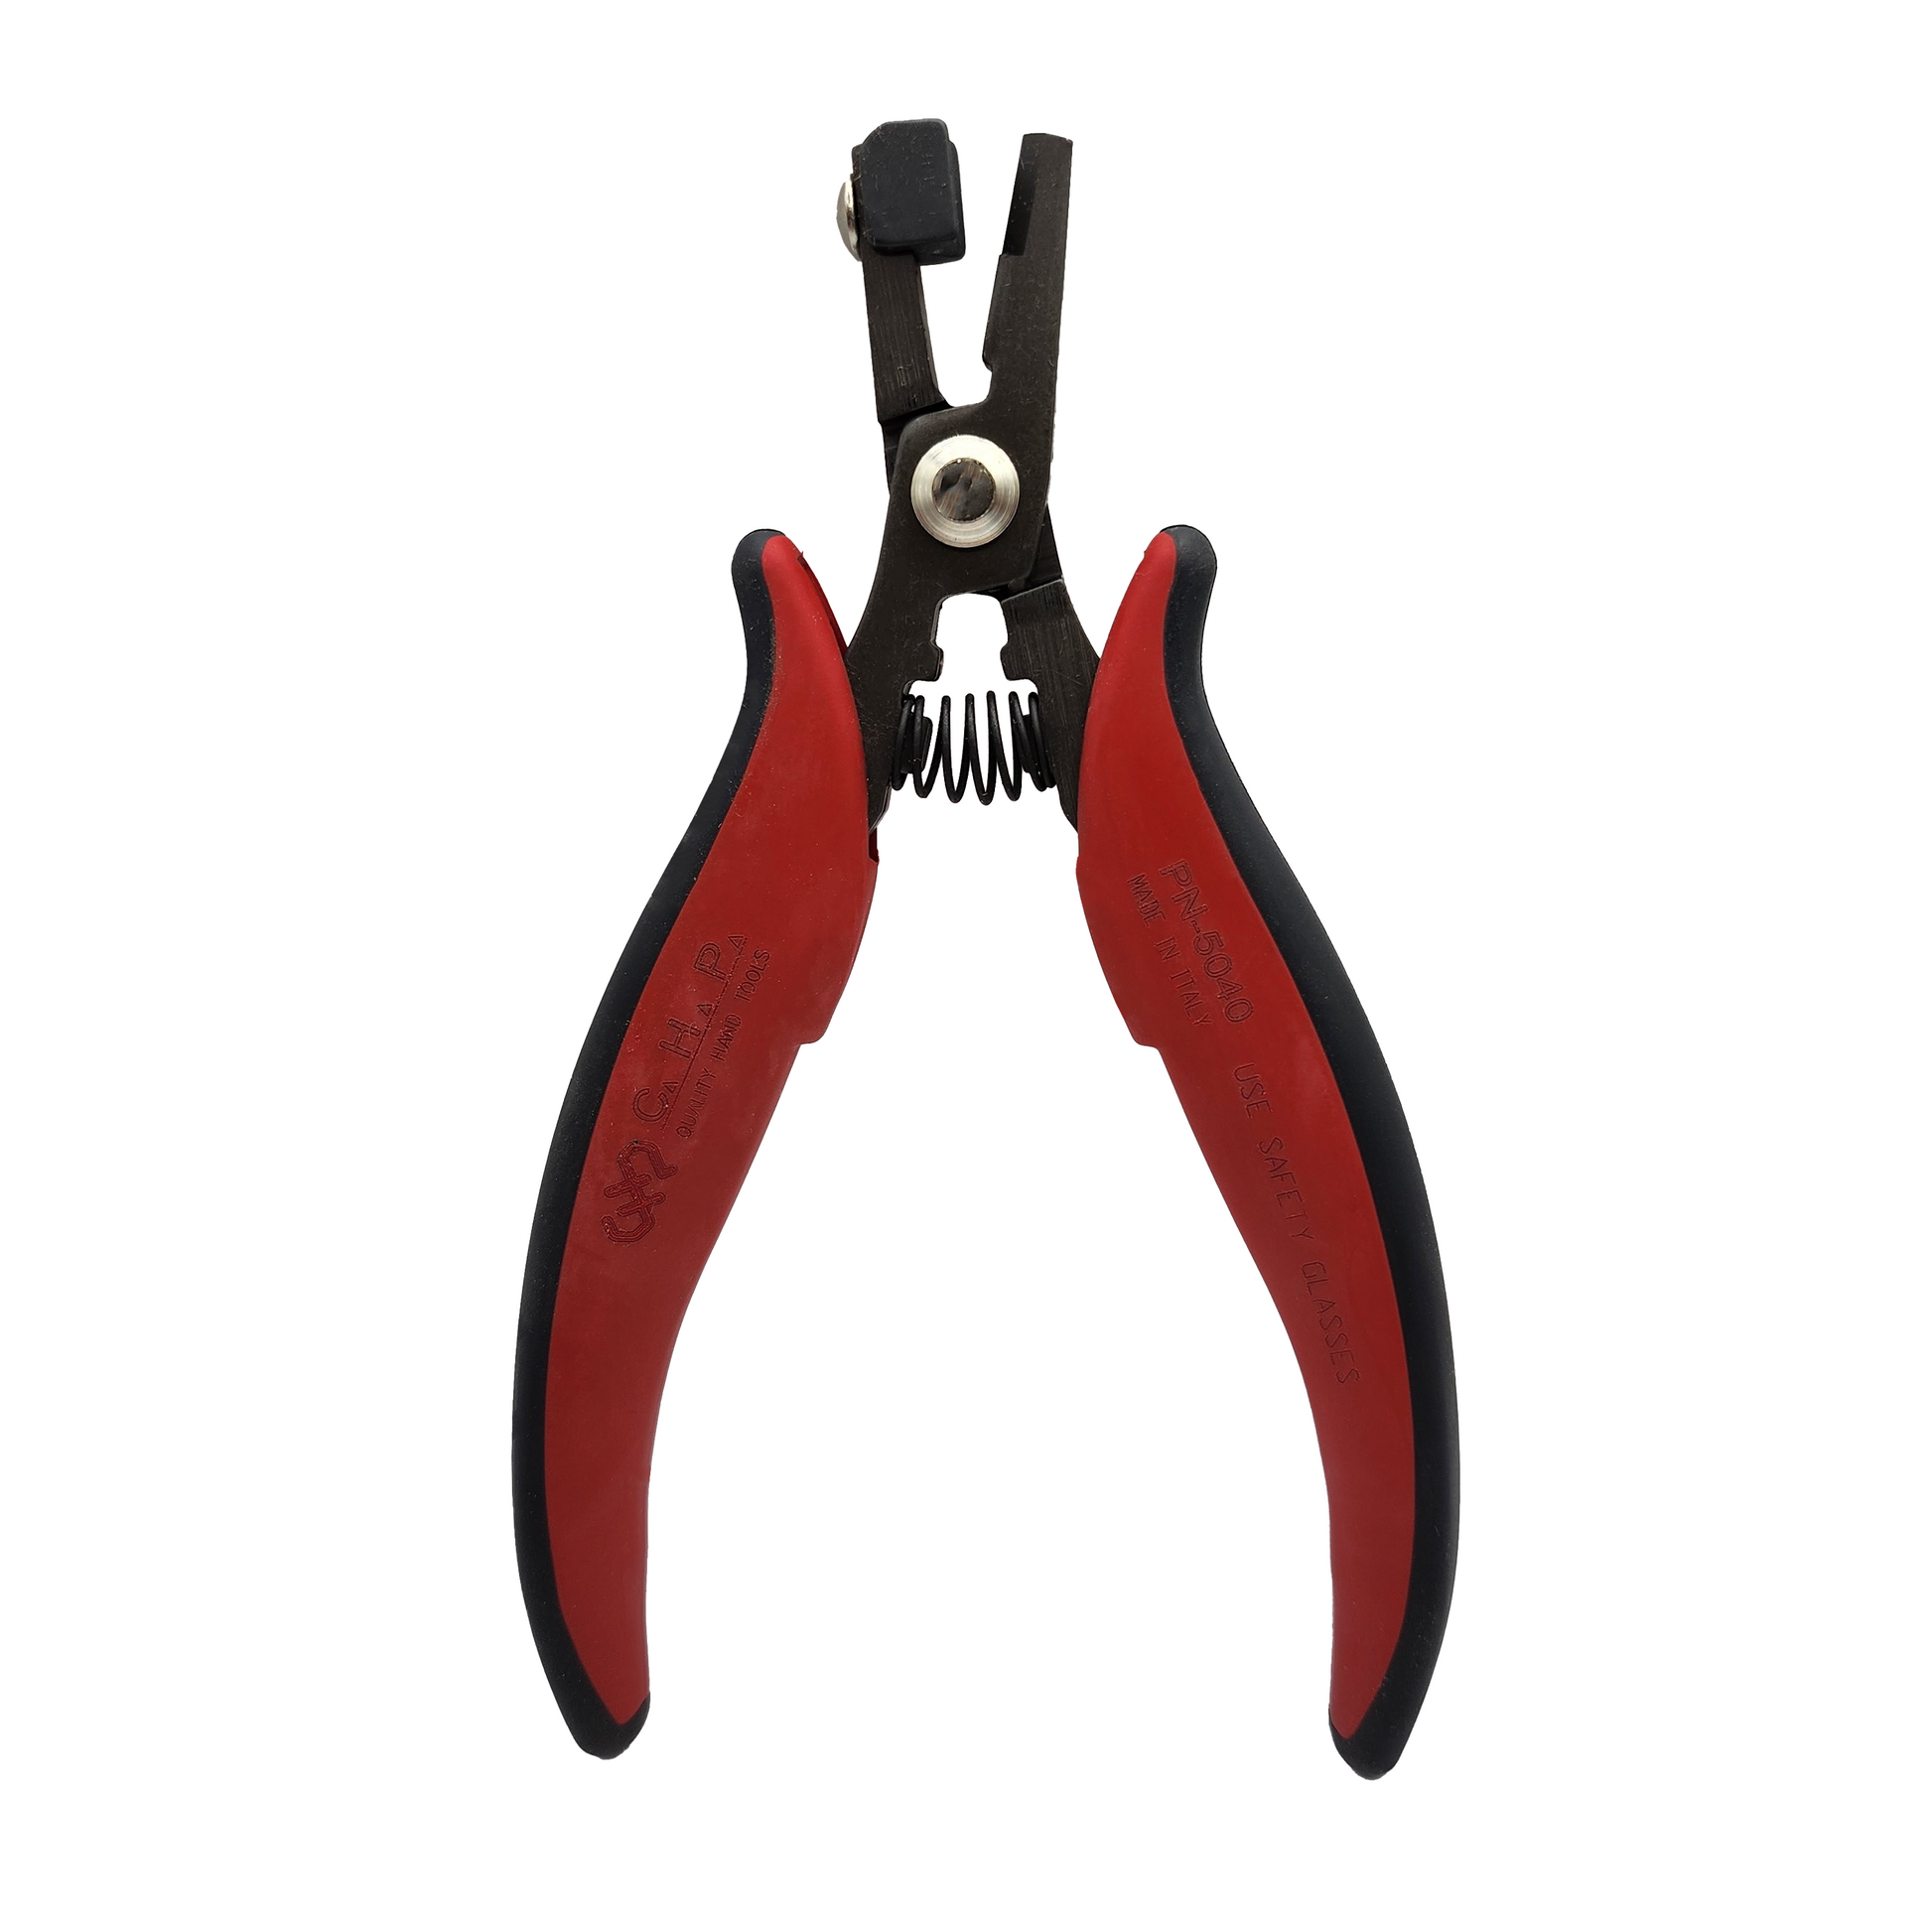 Hakko Products_ CHP PN-5040 Lead Forming Tool_ Cutters, Pliers, Multi-Tools_ Hakko Products